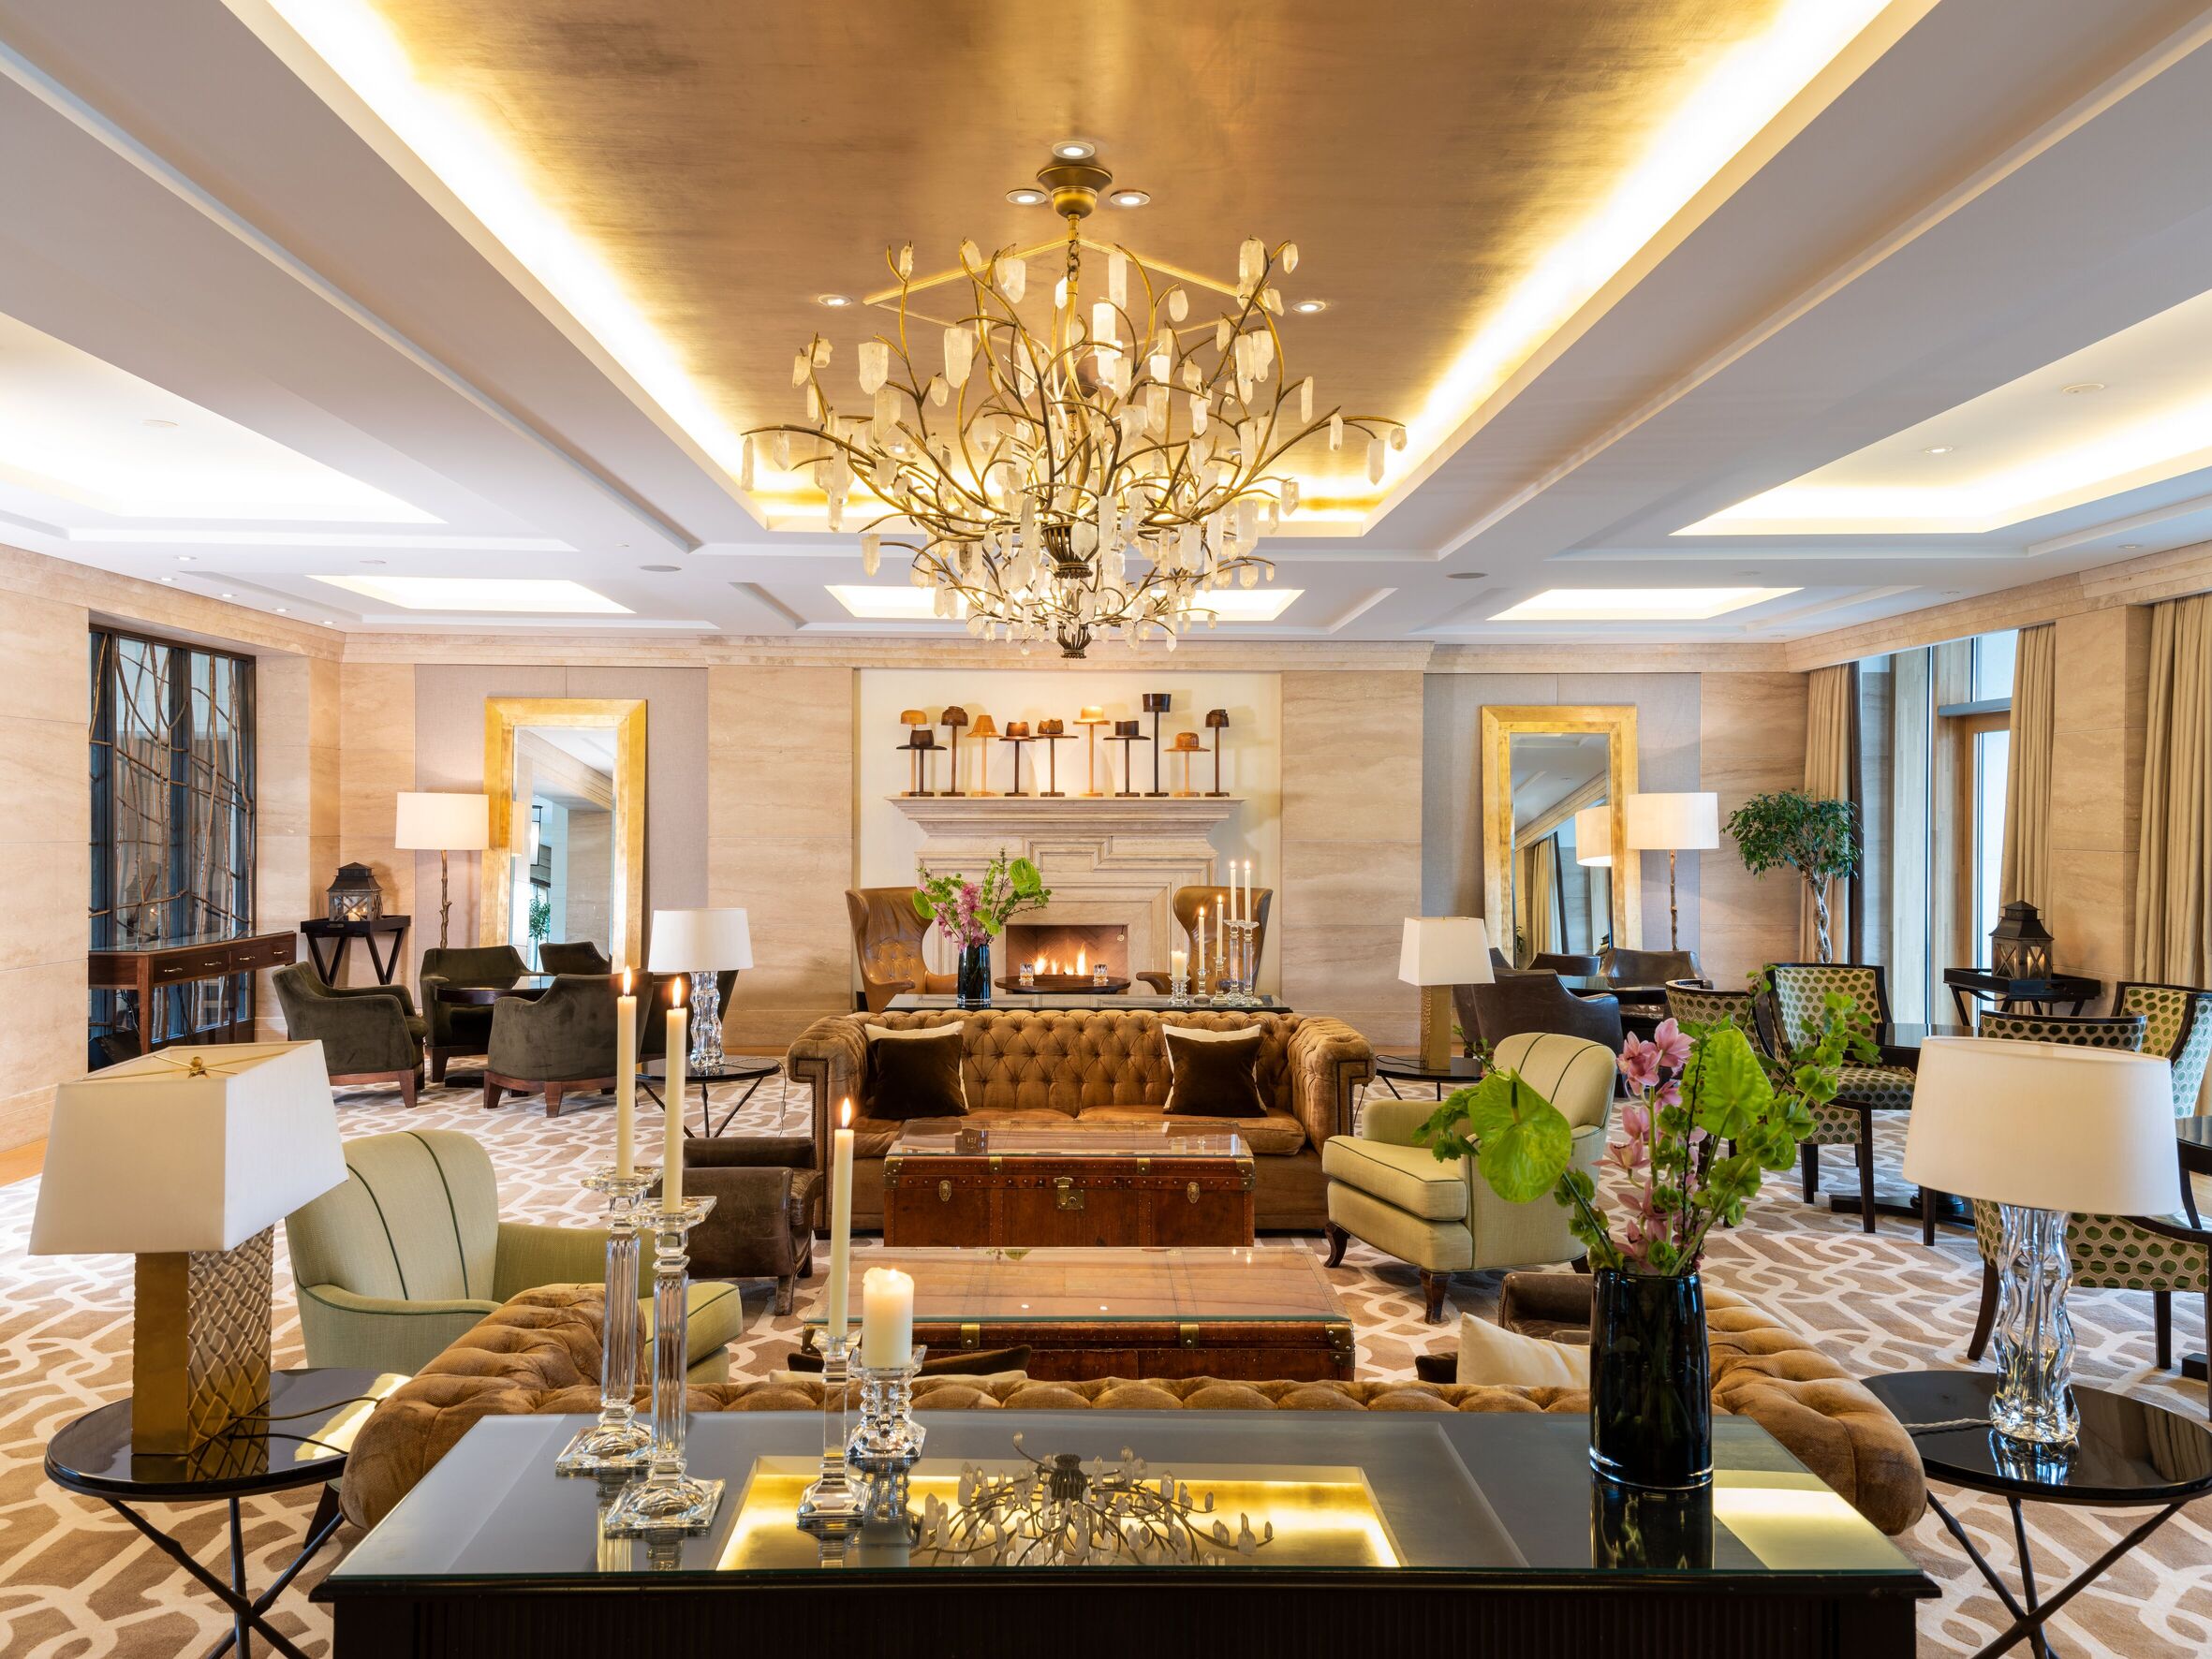 The Europe Hotel Lounge